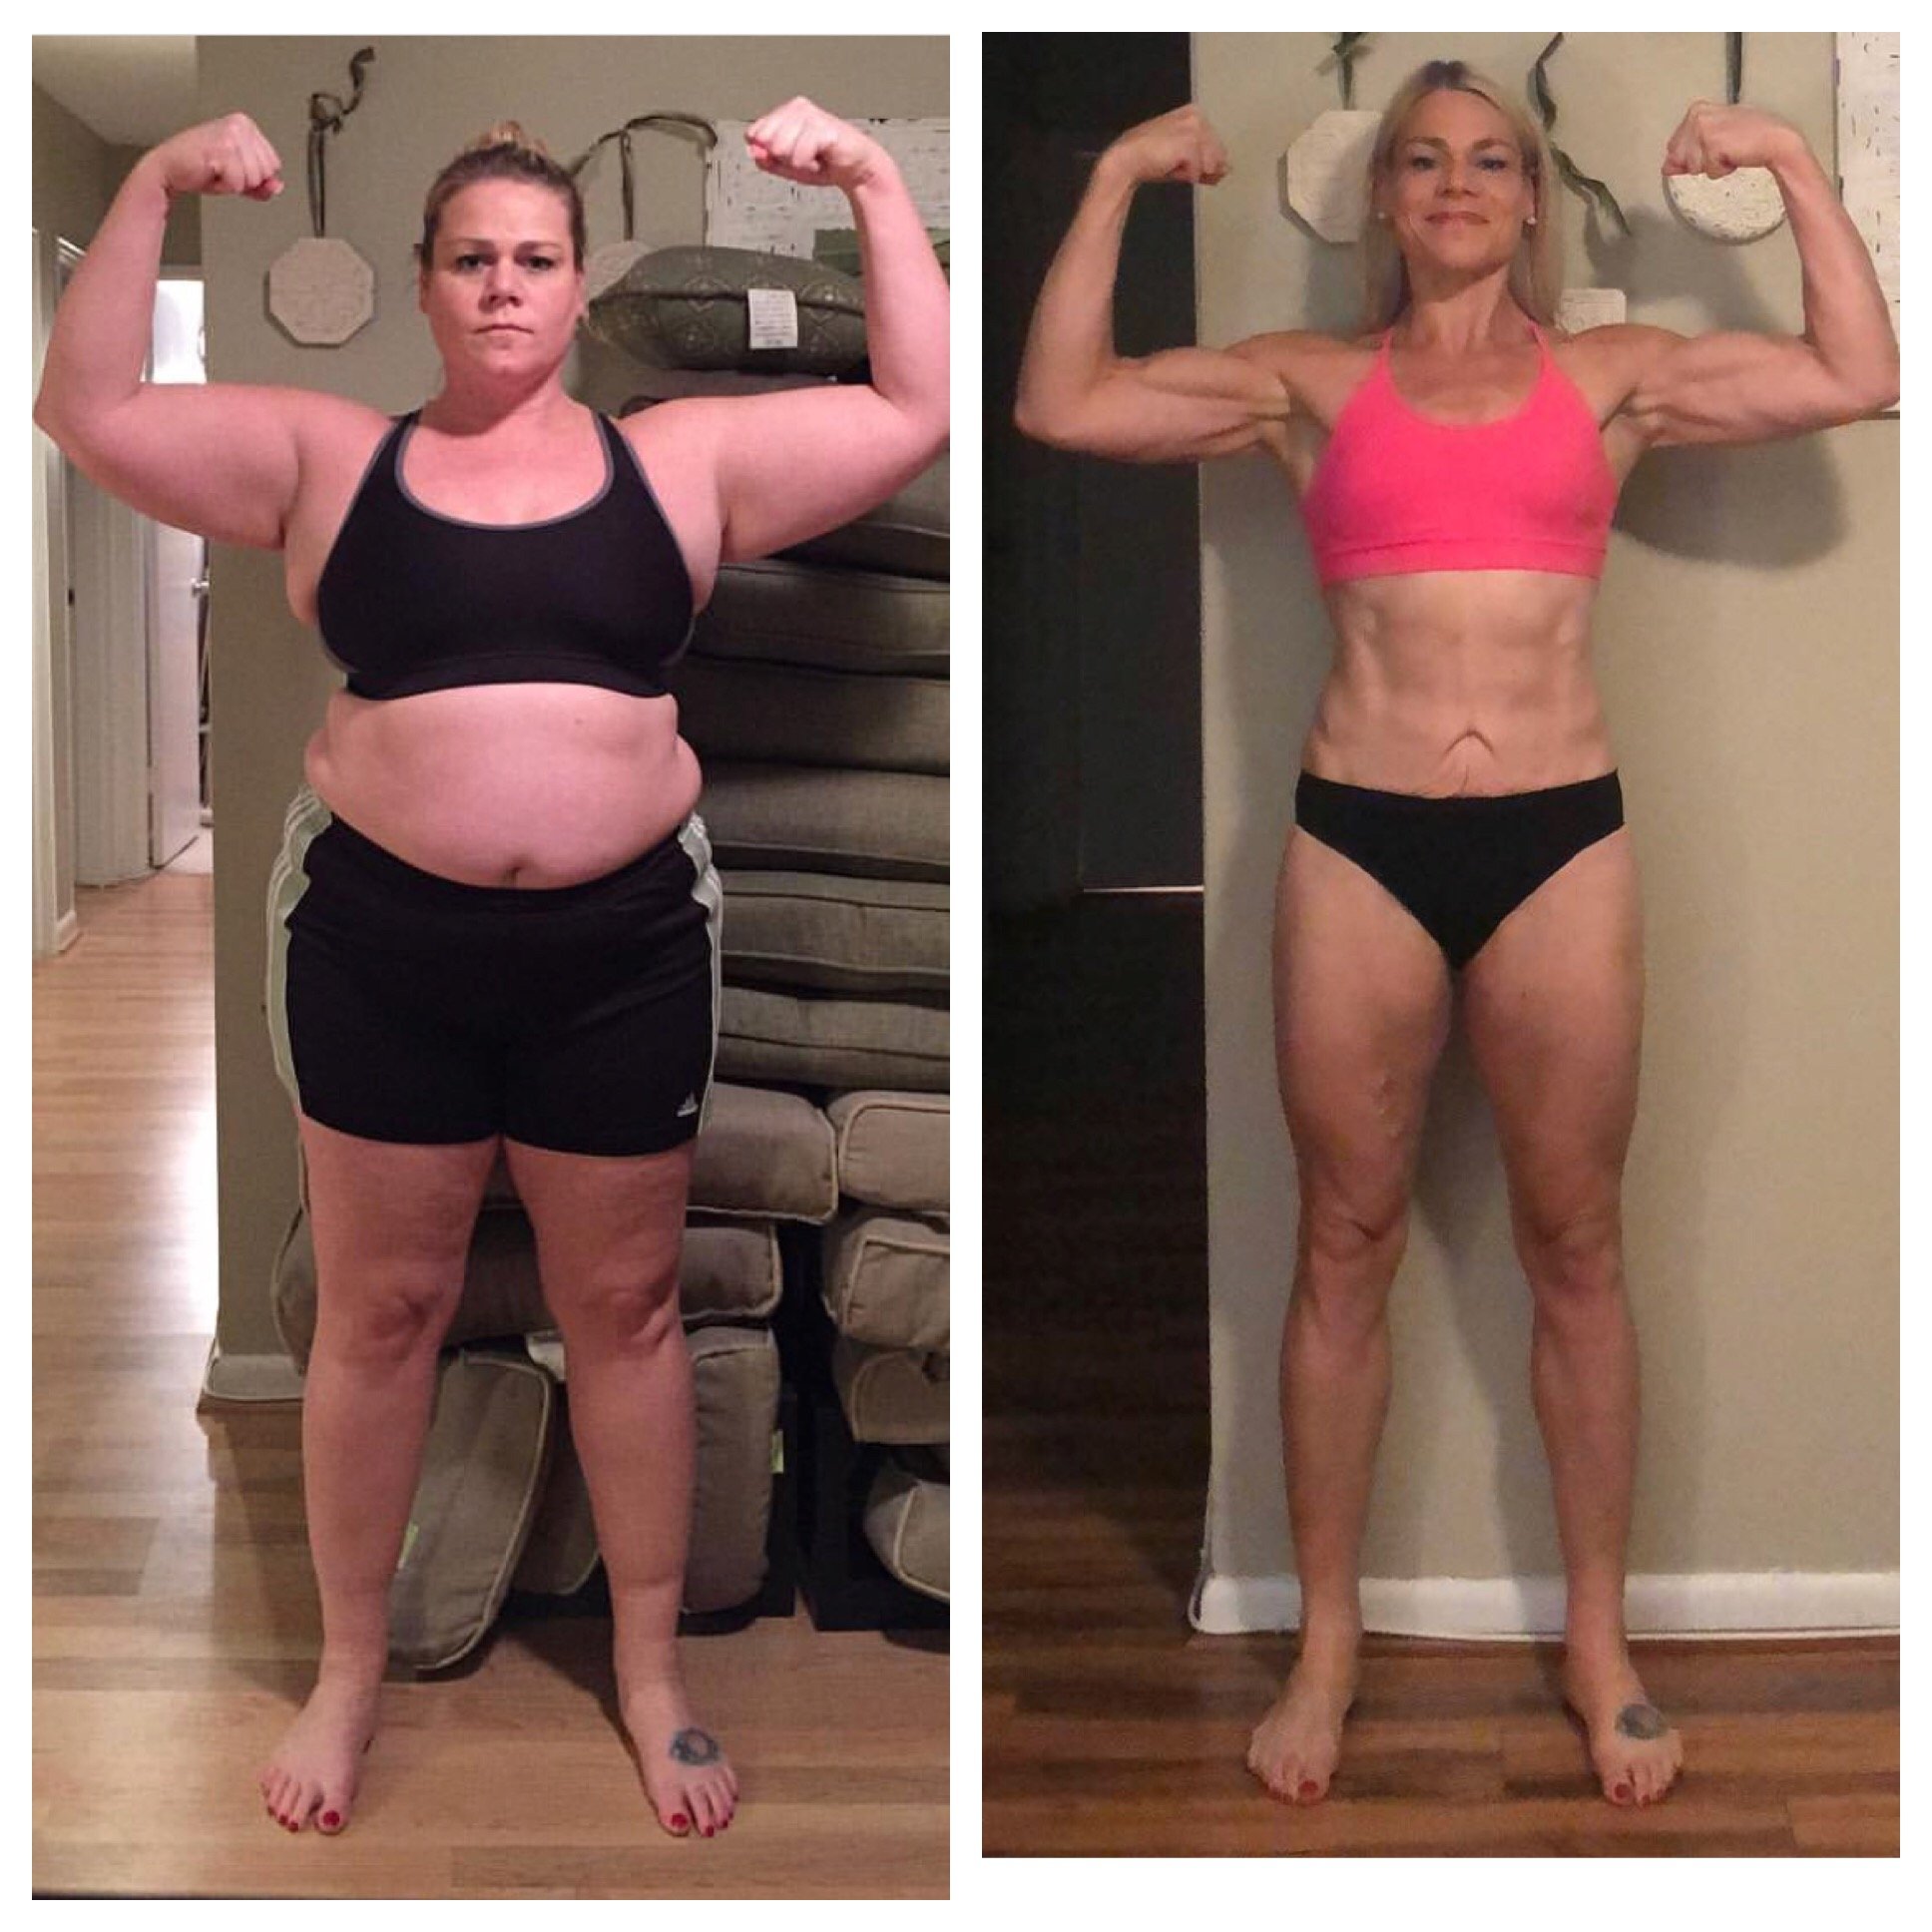 How I Got This Body: Turning 40, Ditching Paleo, and Losing 100 Pounds By Doing CrossFit and Counting Macros